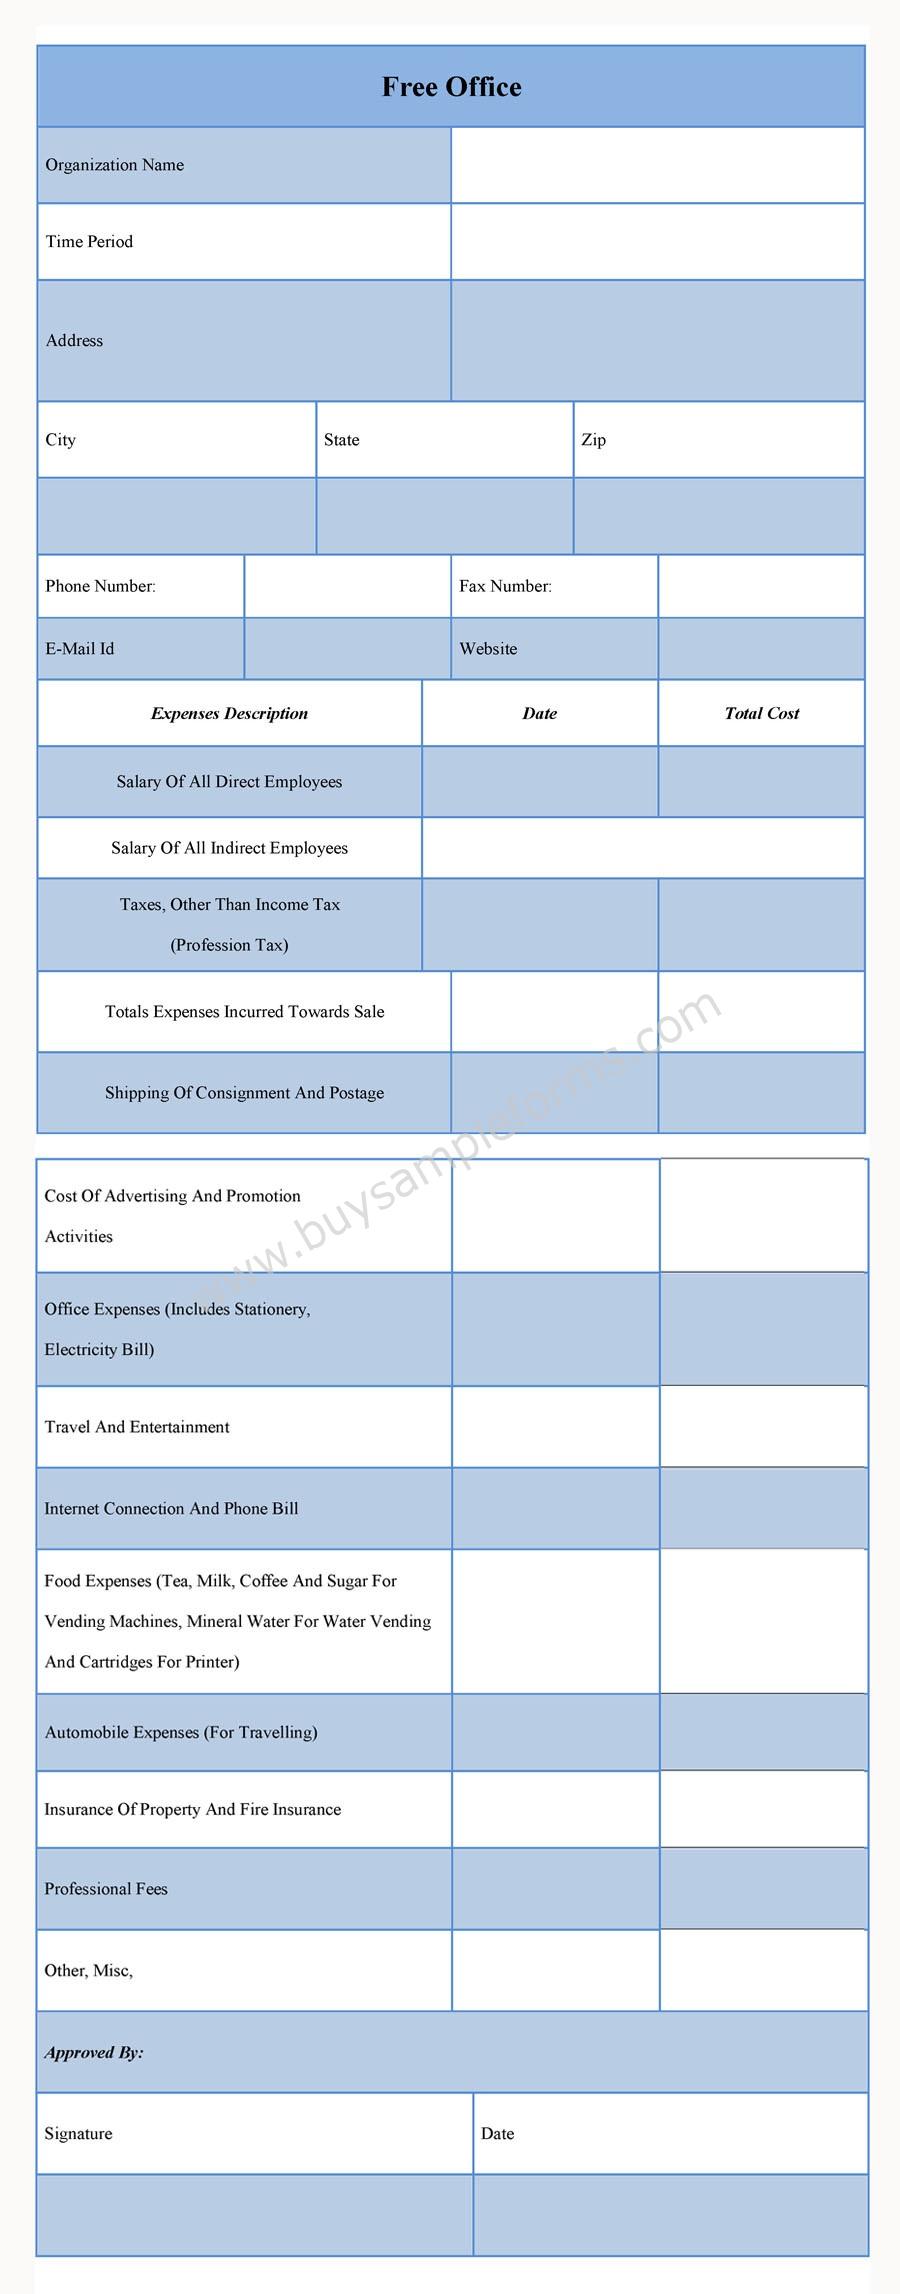 Free Printable Office Forms Printable Forms Free Online